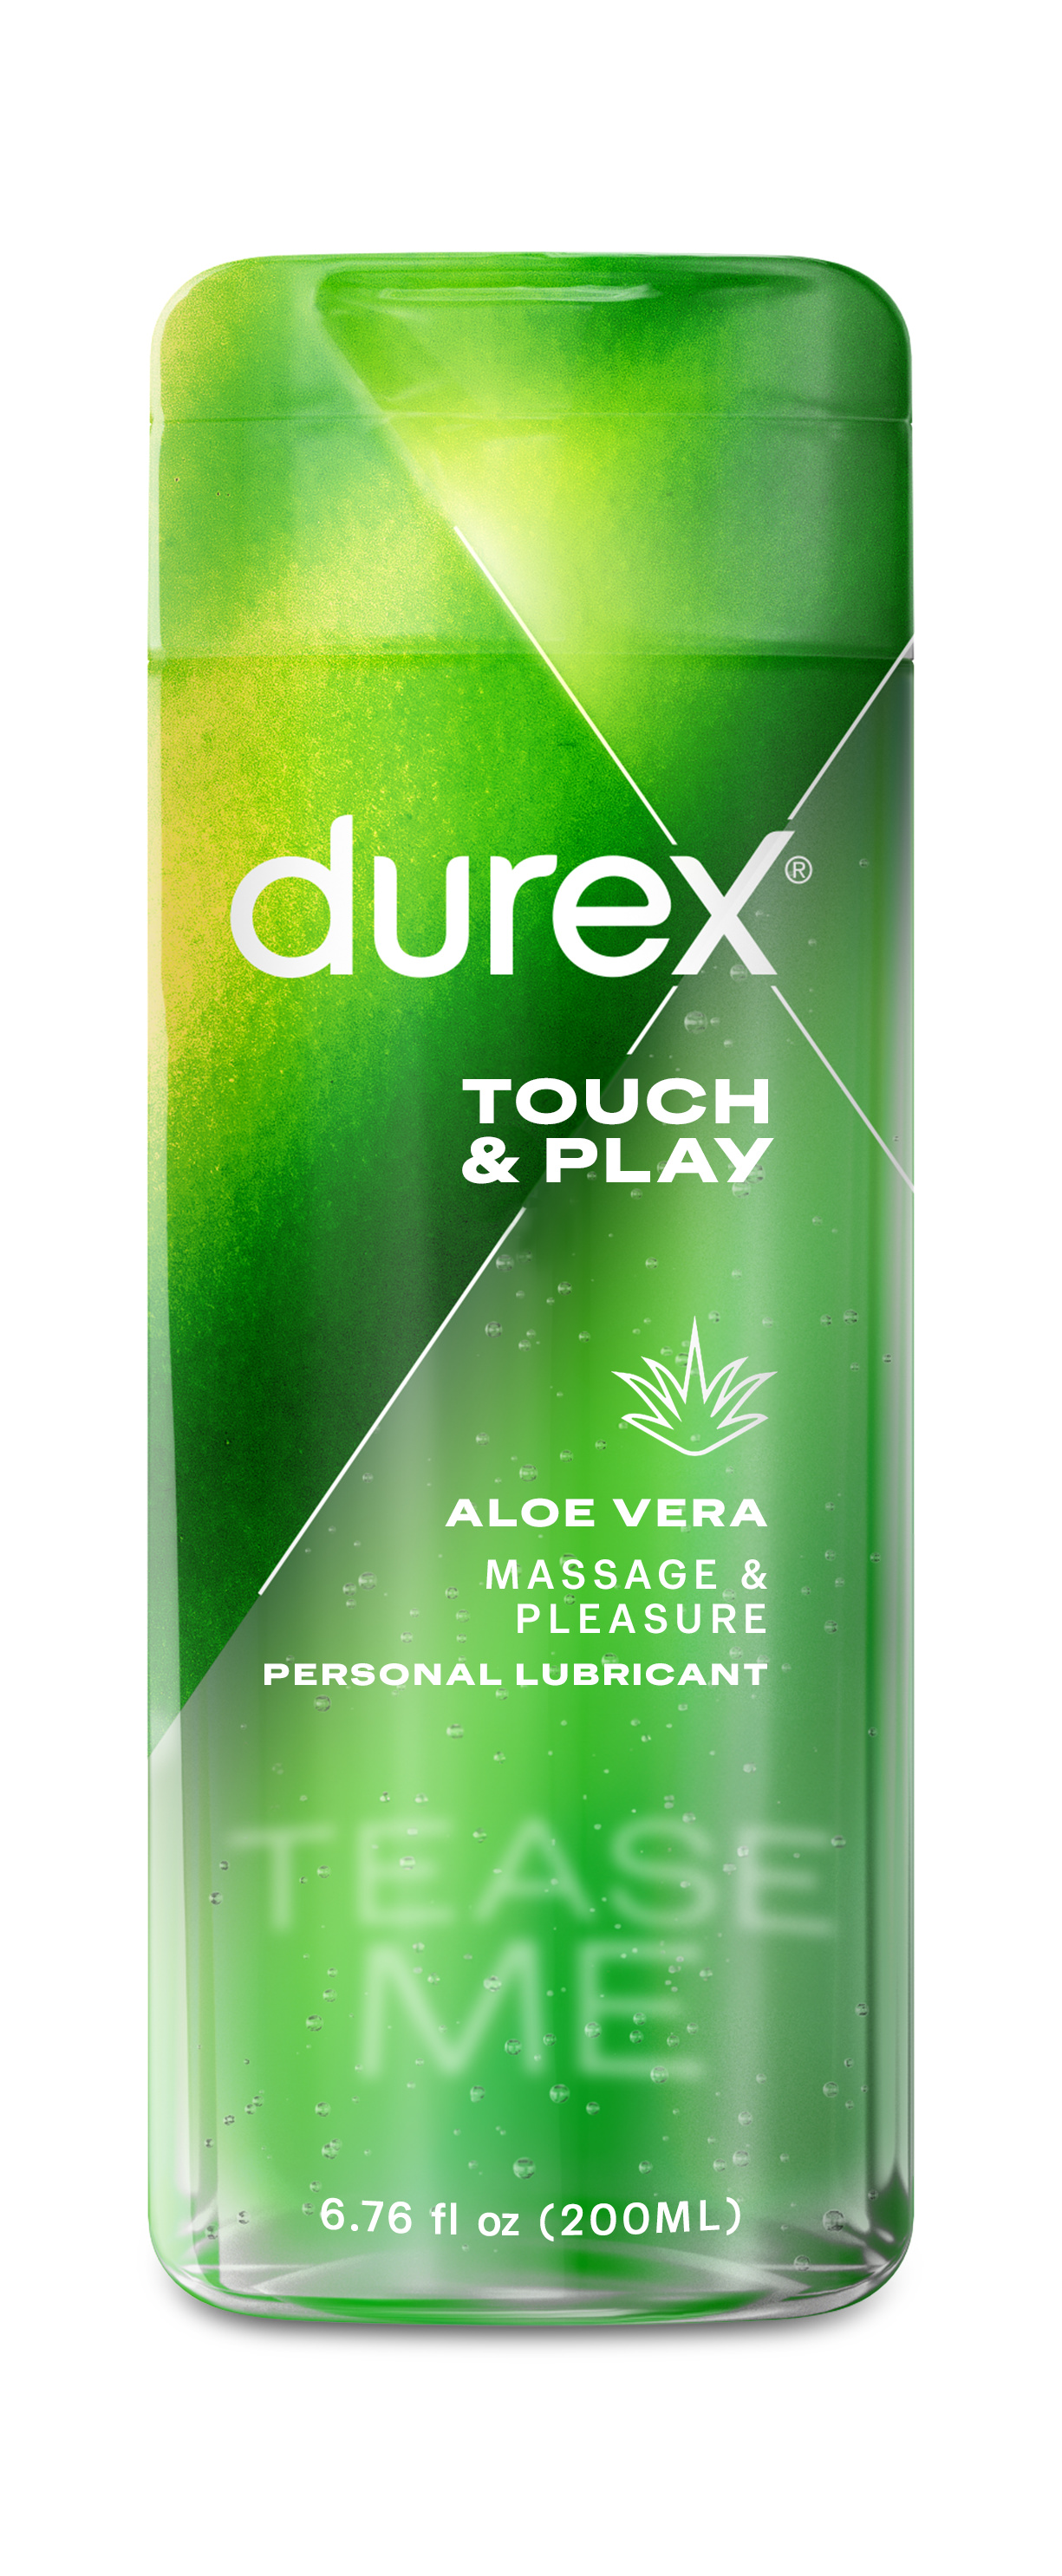 Durex® Touch & Play Aloe Vera Personal Lubricant